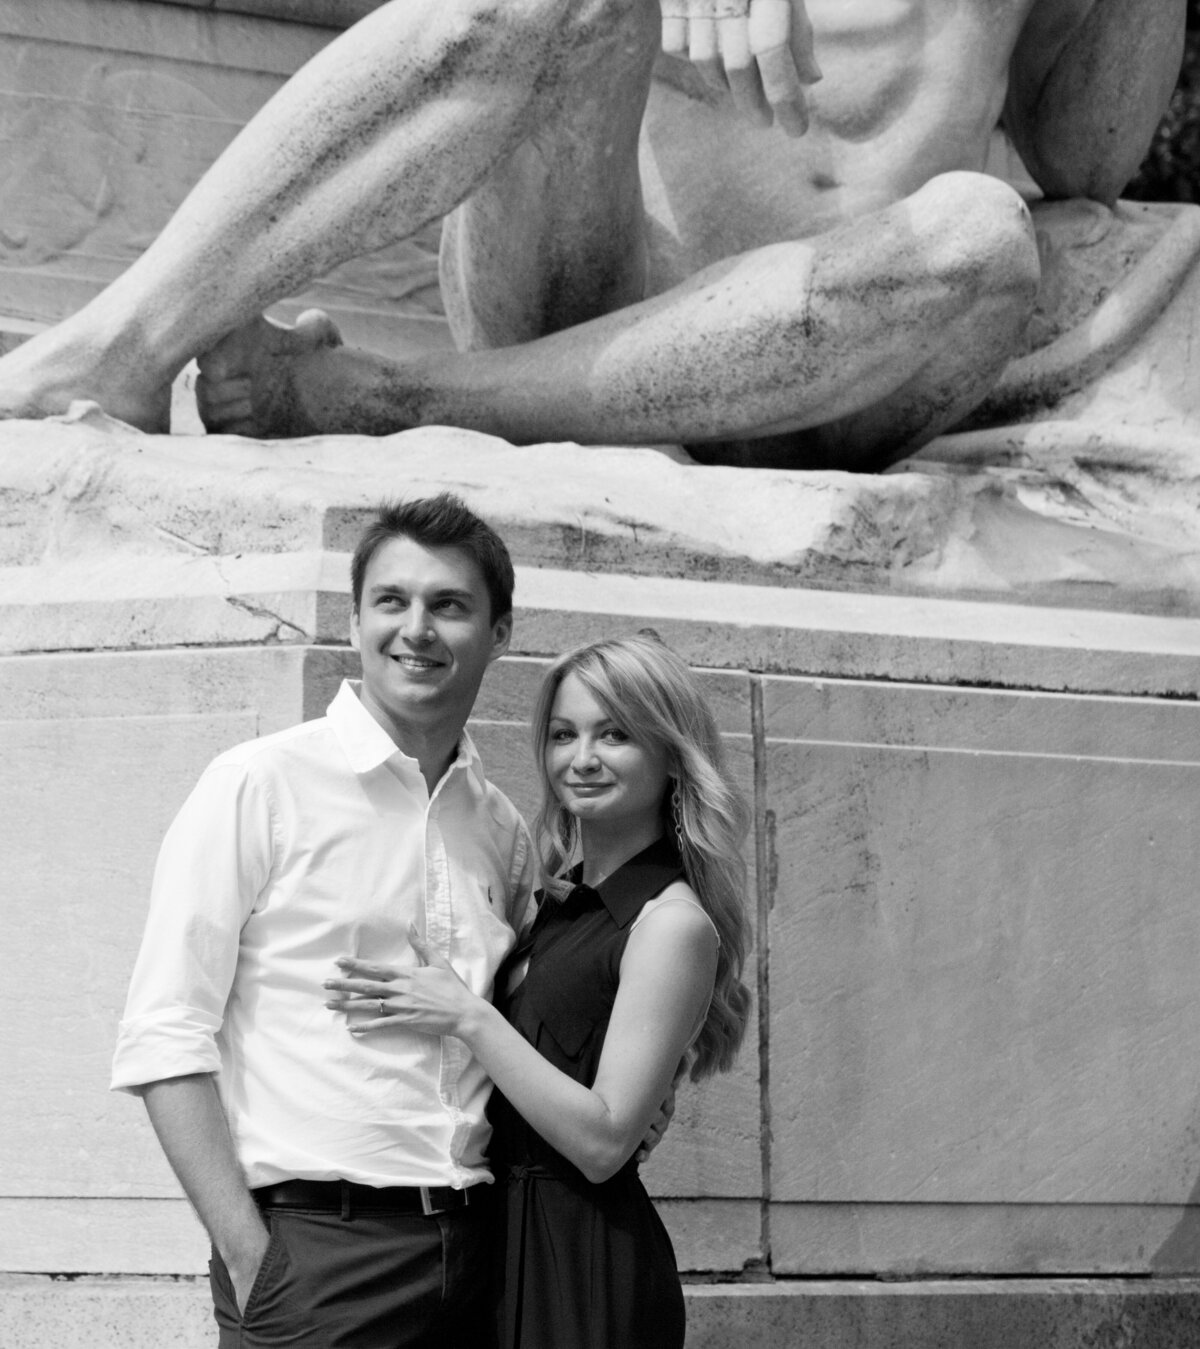 A black and white photograph of a smiling couple posed in front of the iconic statue at the main entrance of Central Park, New York. The man, clad  in white shirt and dark pants, gently holds the woman close, while she, adorned in a chick black dress, looks toward the camera with a soft smile. The grandeur of the statue, a symbol of the park's entrance, looms in the background, adding a timelss and artistic ambiance to the couple's portrait. -Photographed by Hans Gonzalez